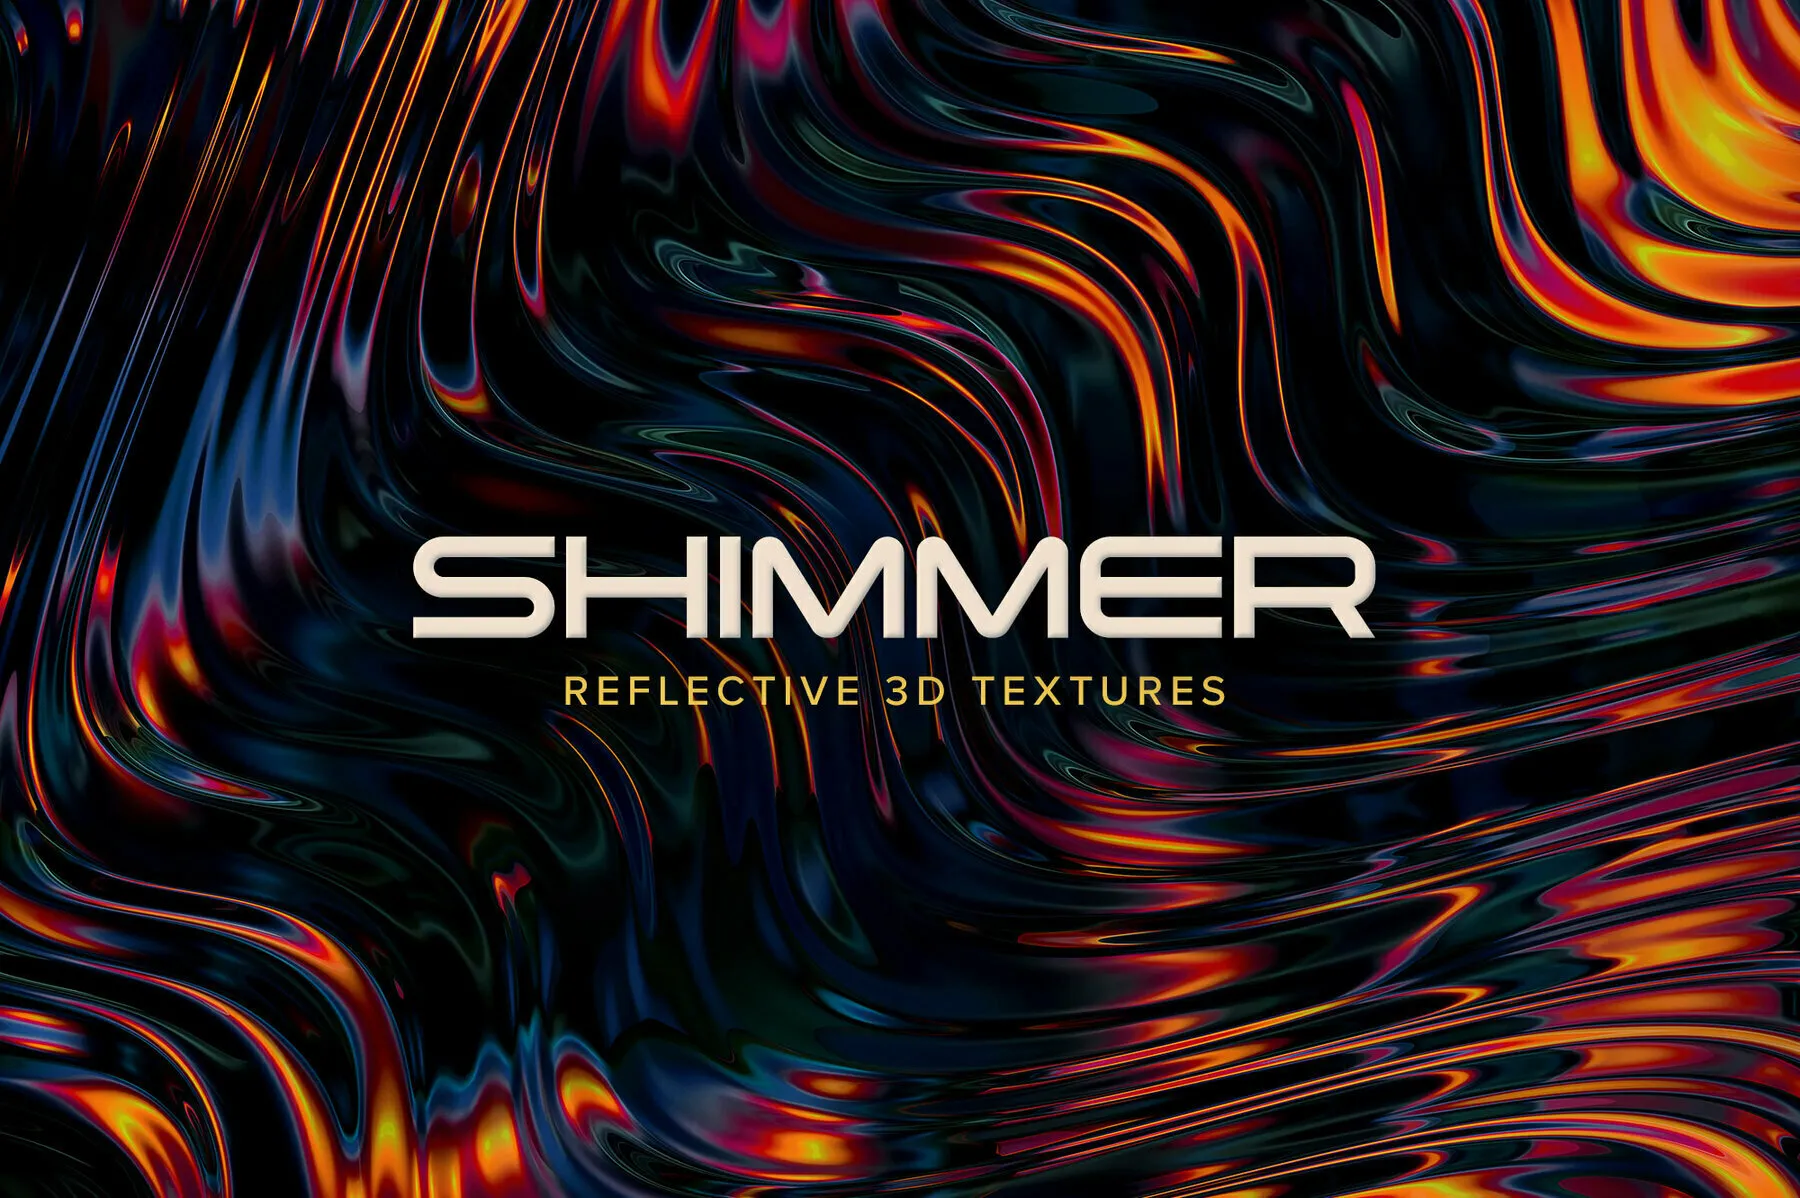 Shimmer – Reflective 3D Textures